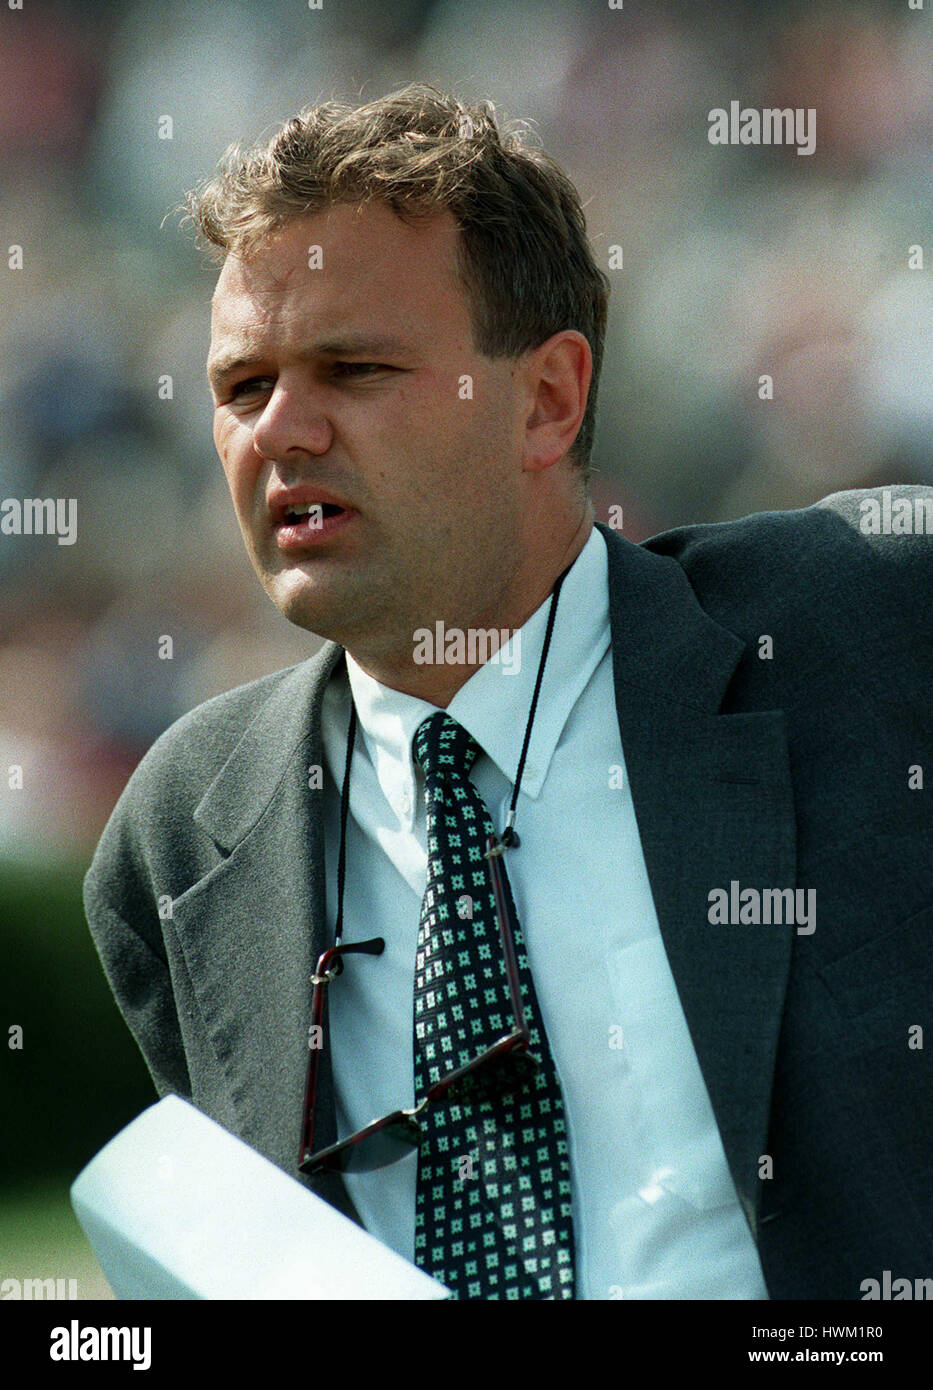 PAUL HAYWARD DAILY TELEGRAPH SPORTS WRITER 10 Mai 1995 Banque D'Images